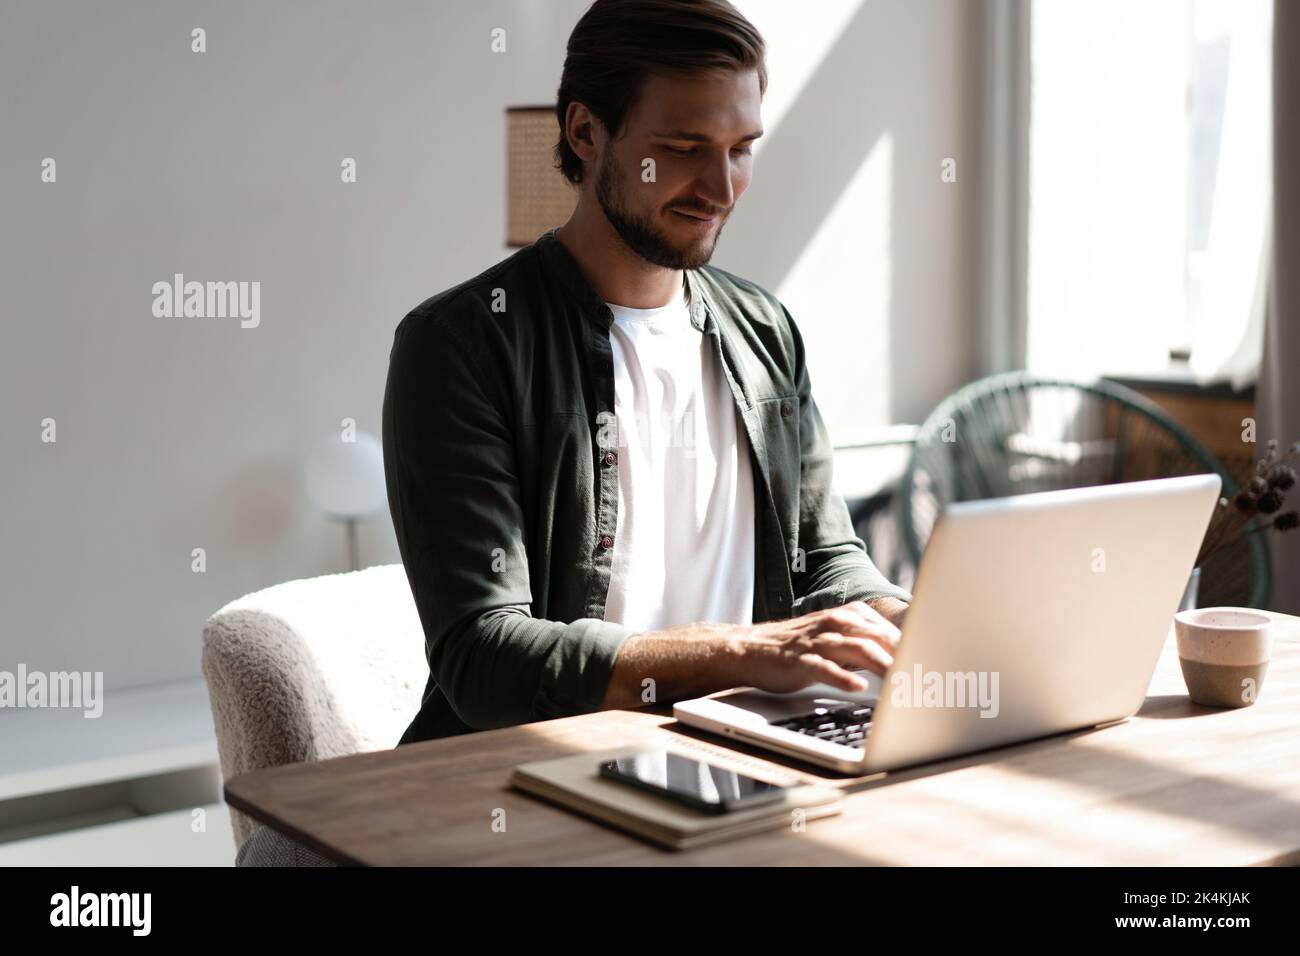 Male remote working from home and having work confrence video call. Freelancer working on laptop at home office Stock Photo